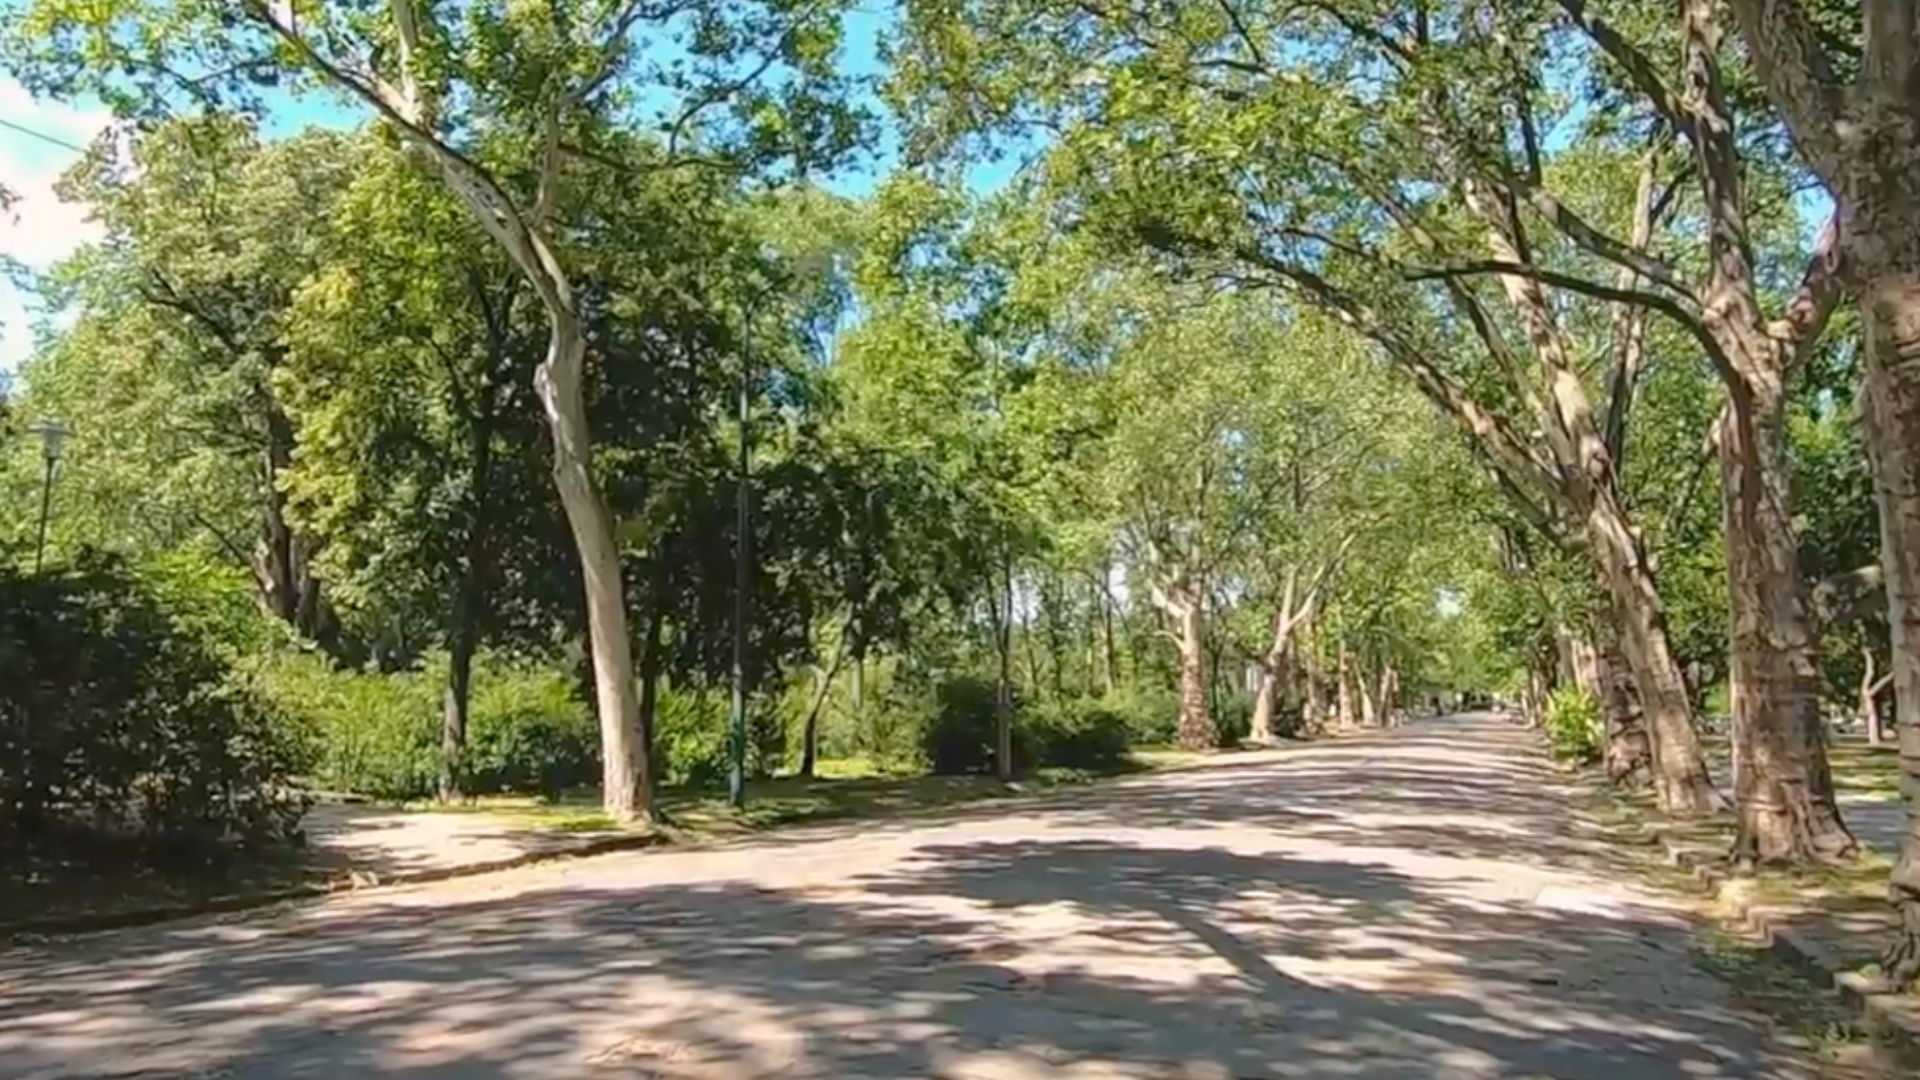 A tree-lined pathway in City Park (Városliget) in Budapest, Hungary.